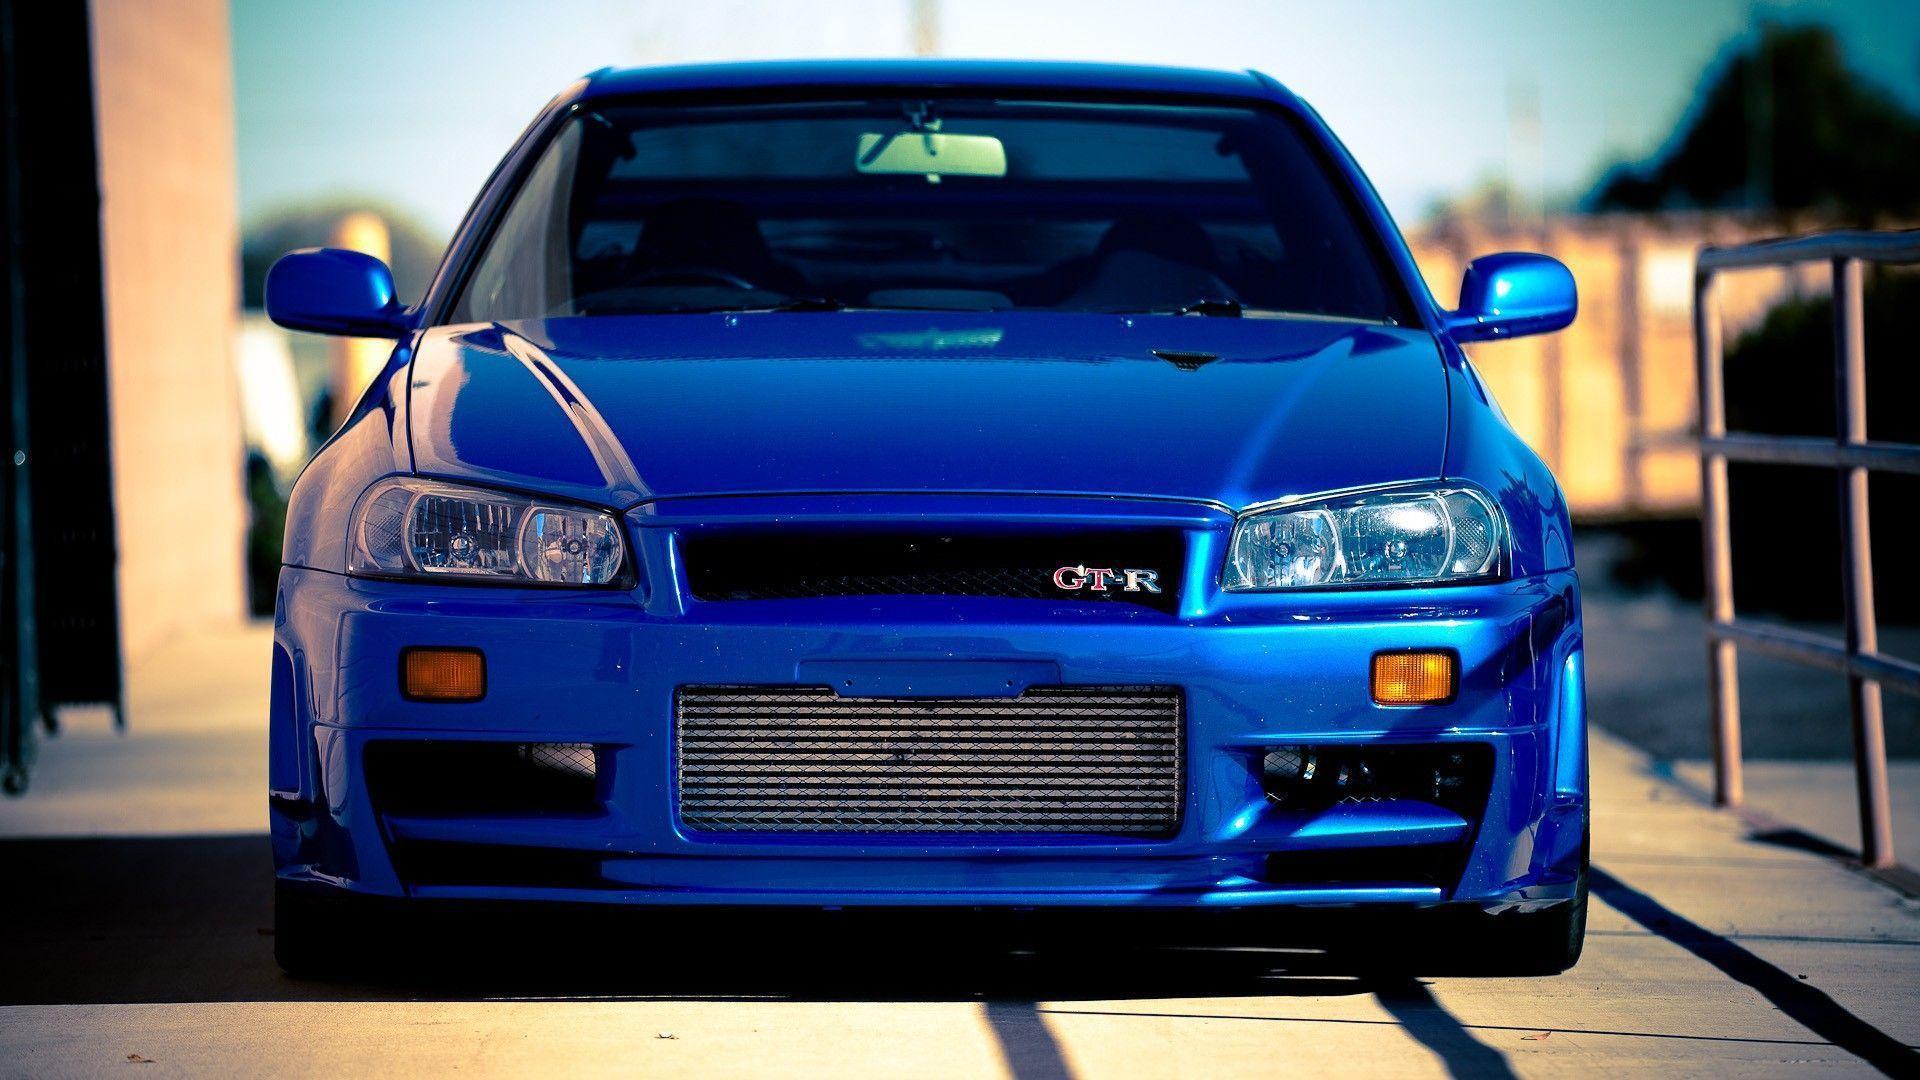 Skyline R34 Wallpapers - Wallpaper Cave